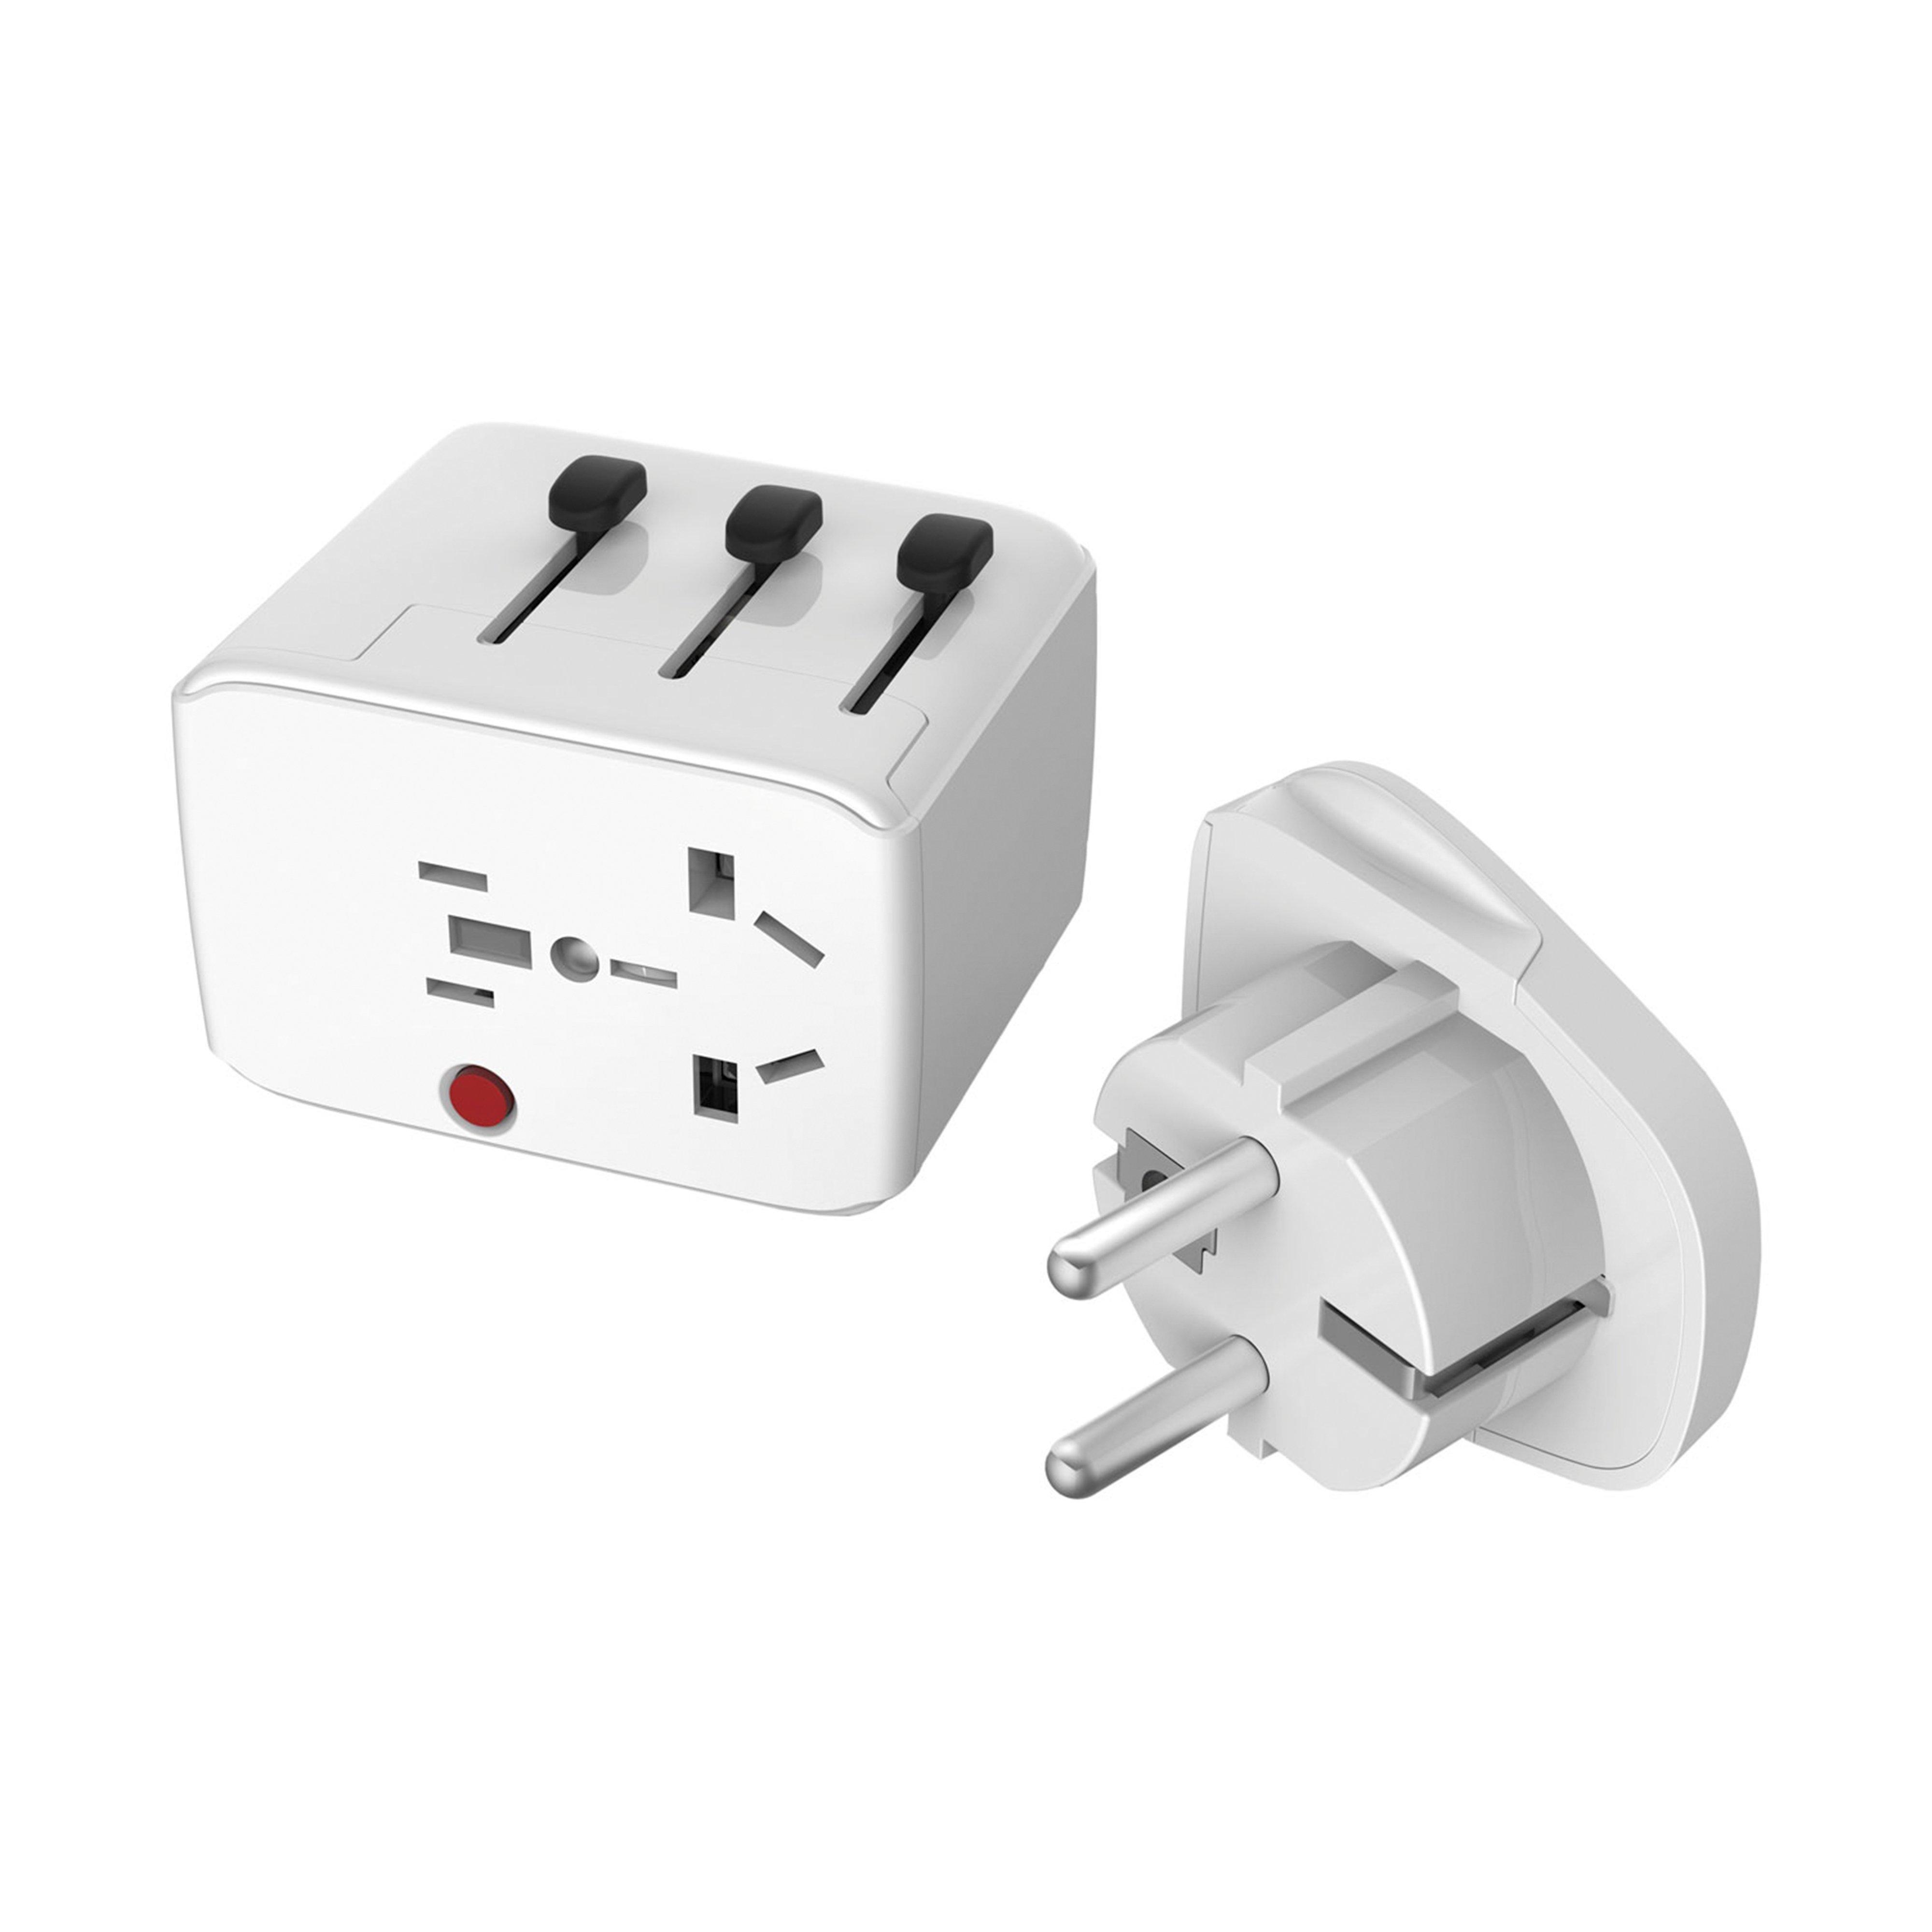 Lifeventure USB Travel Adapter Review